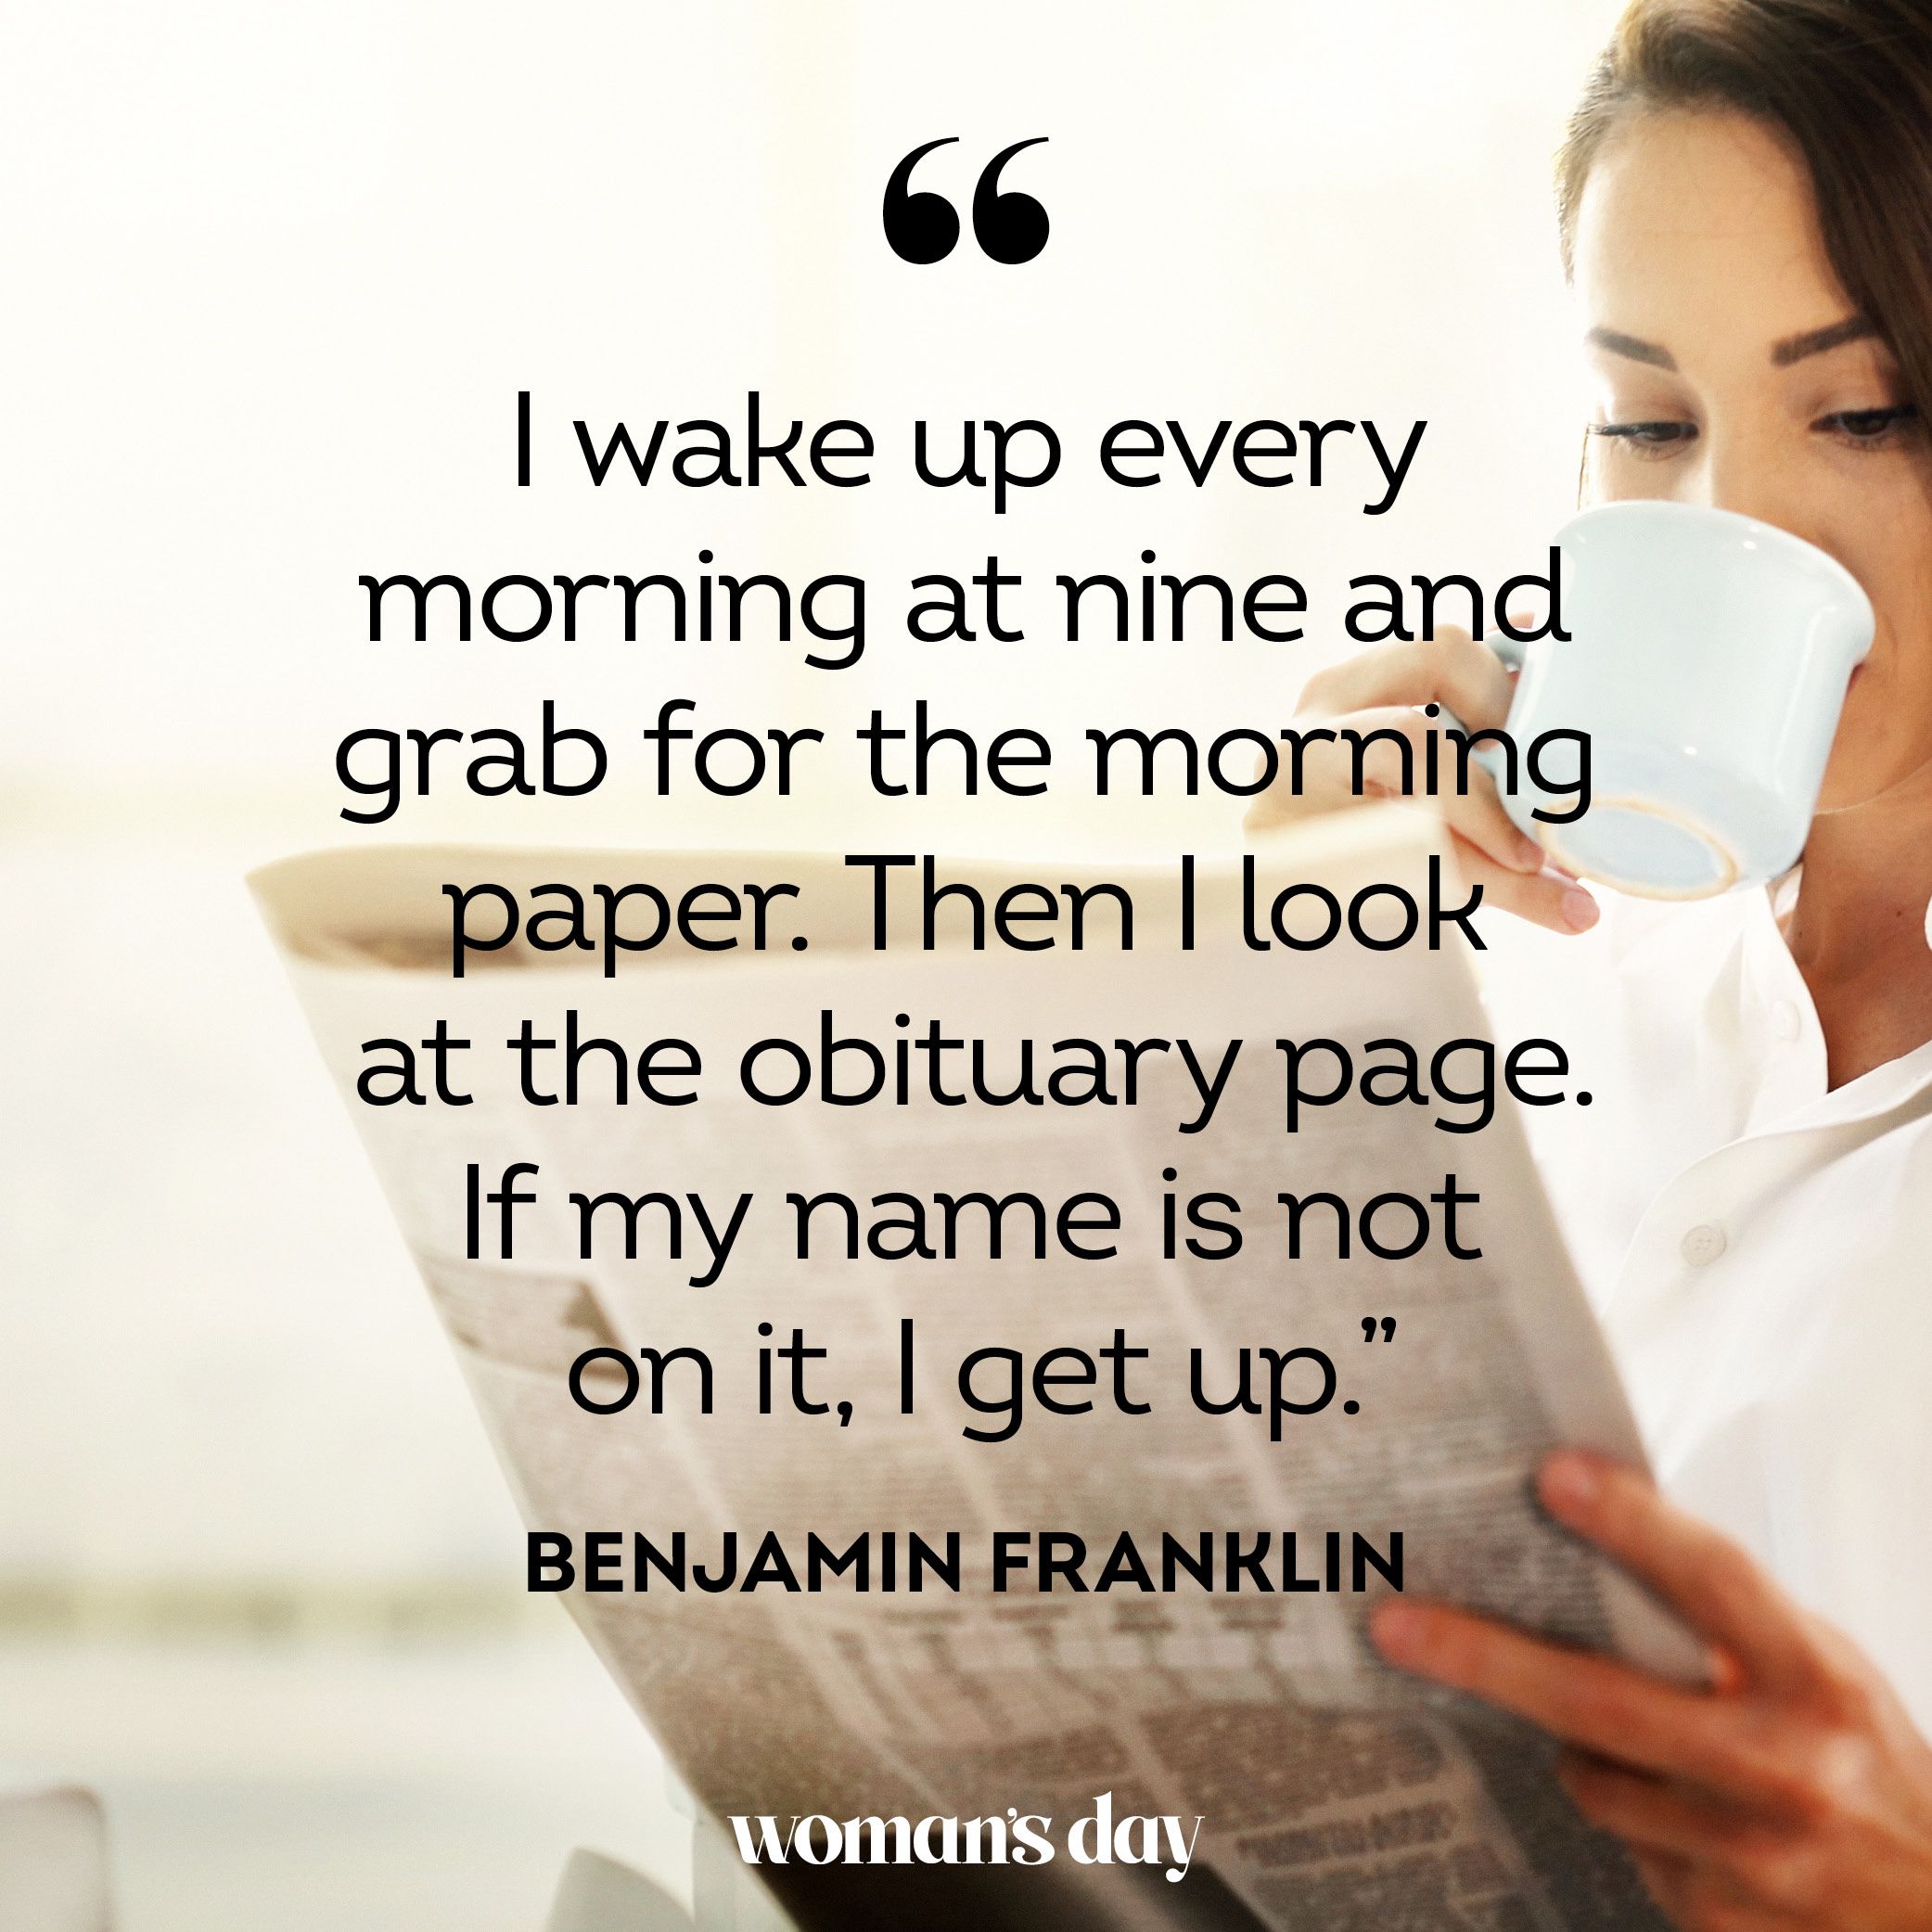 25 Motivational Morning Quotes to Inspire Your Day